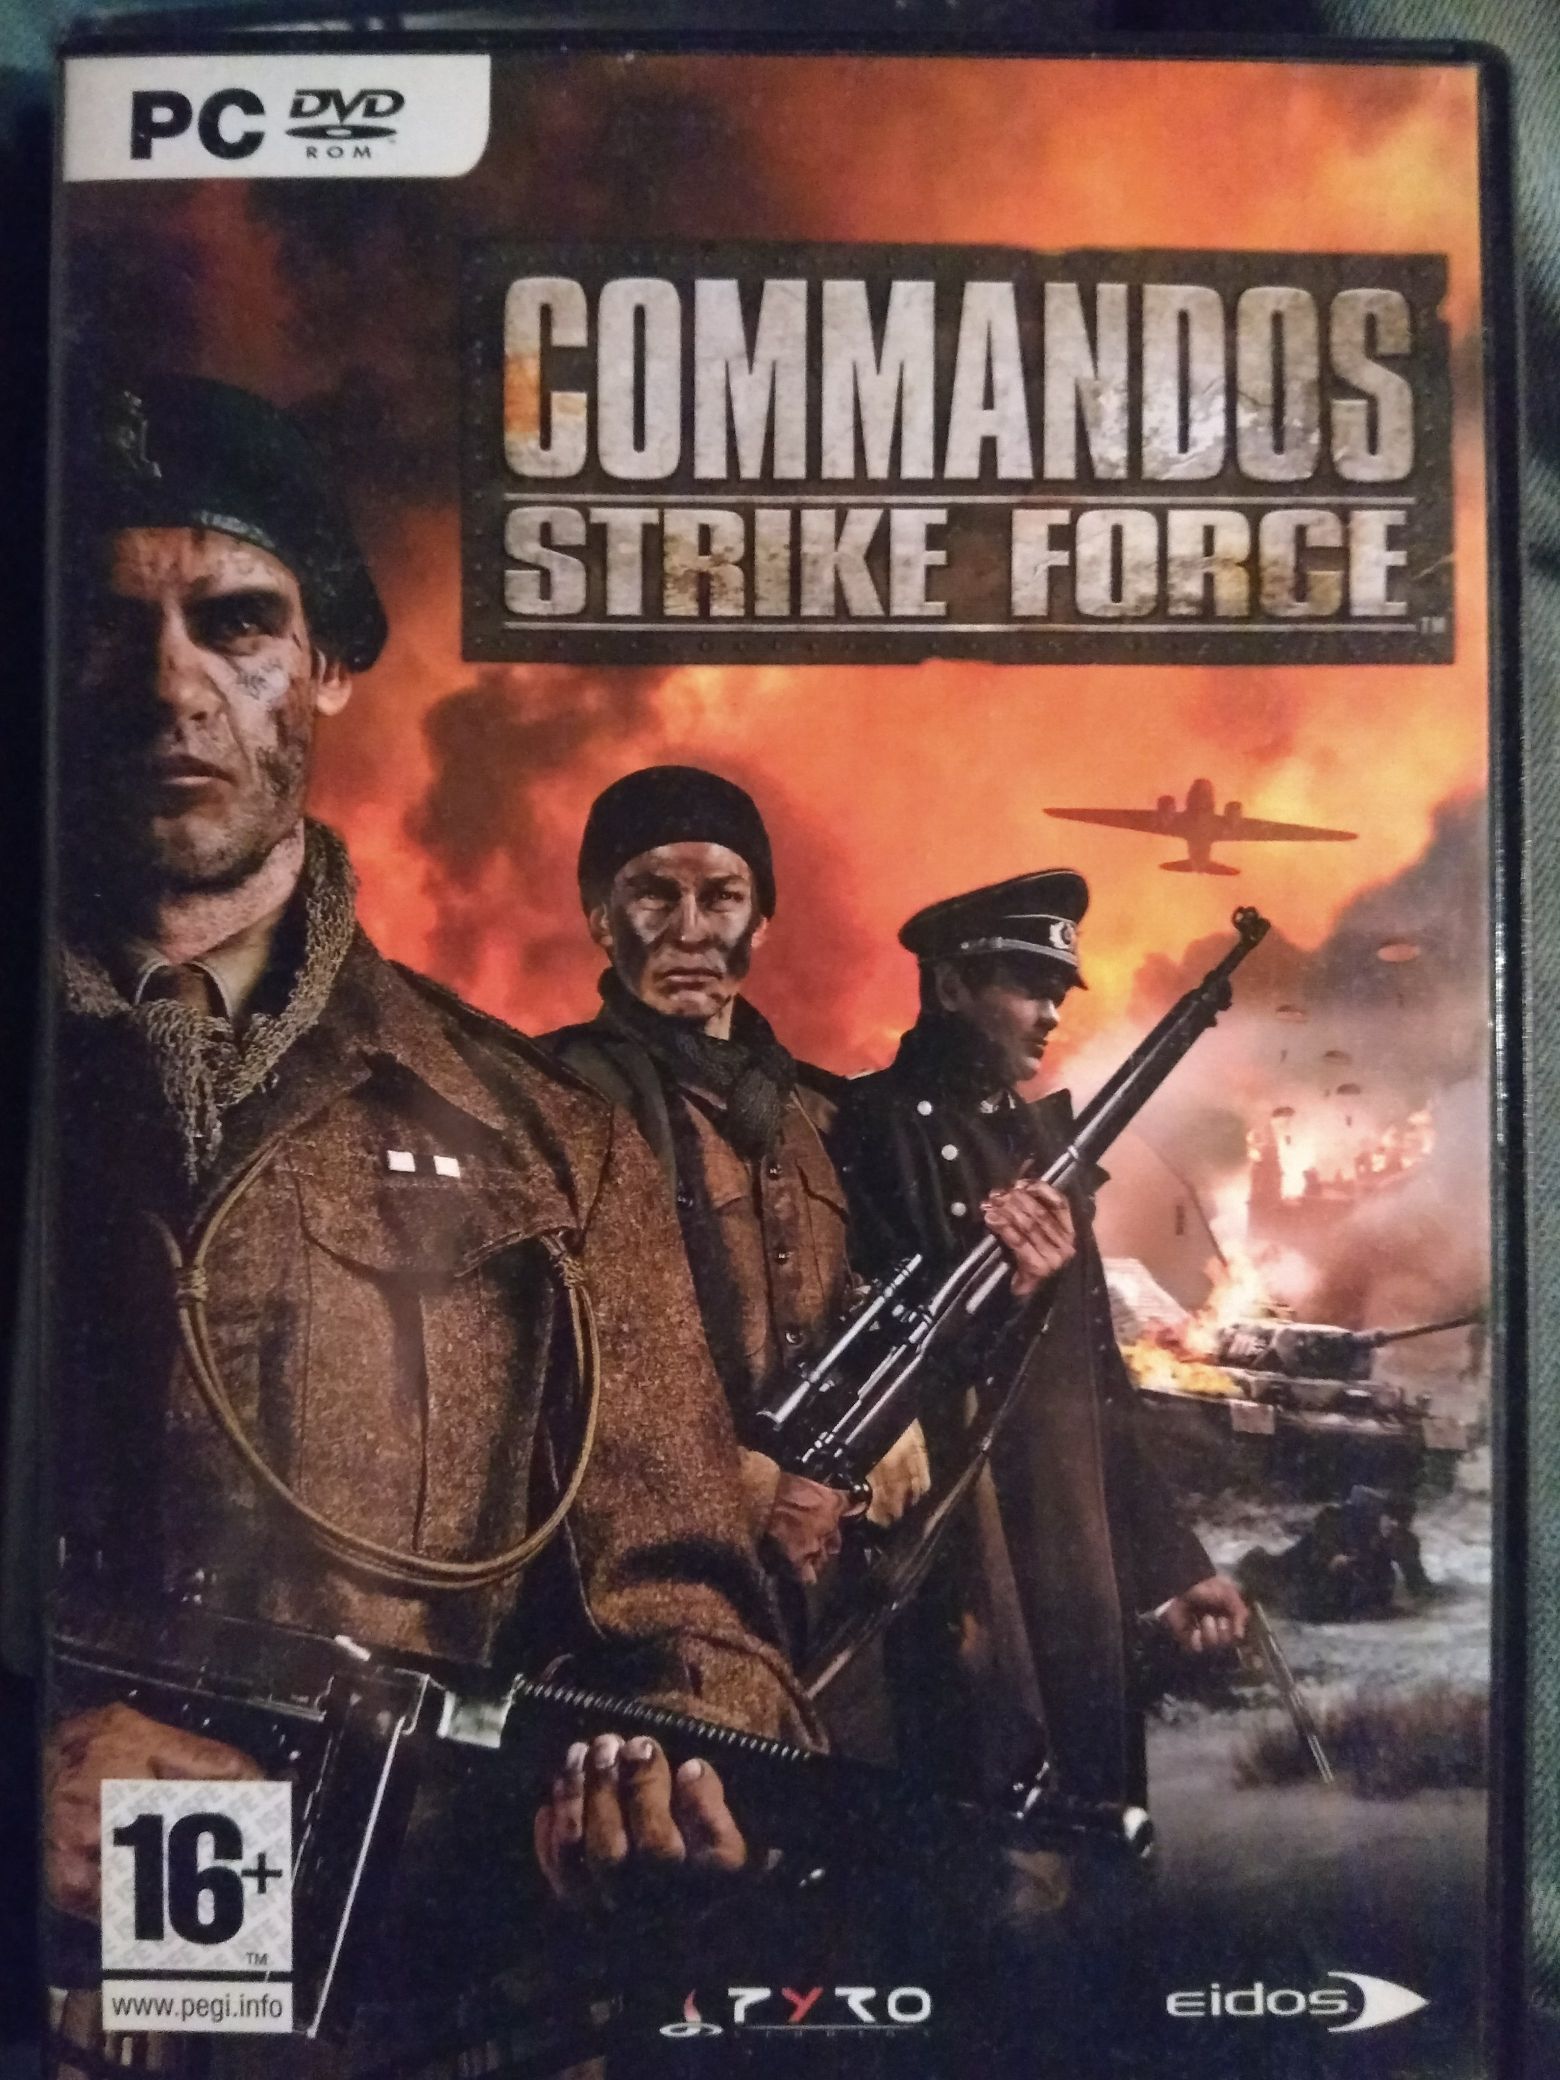 Commandos Strike Force - PC video game collectible [Barcode 5032921022736] - Main Image 1